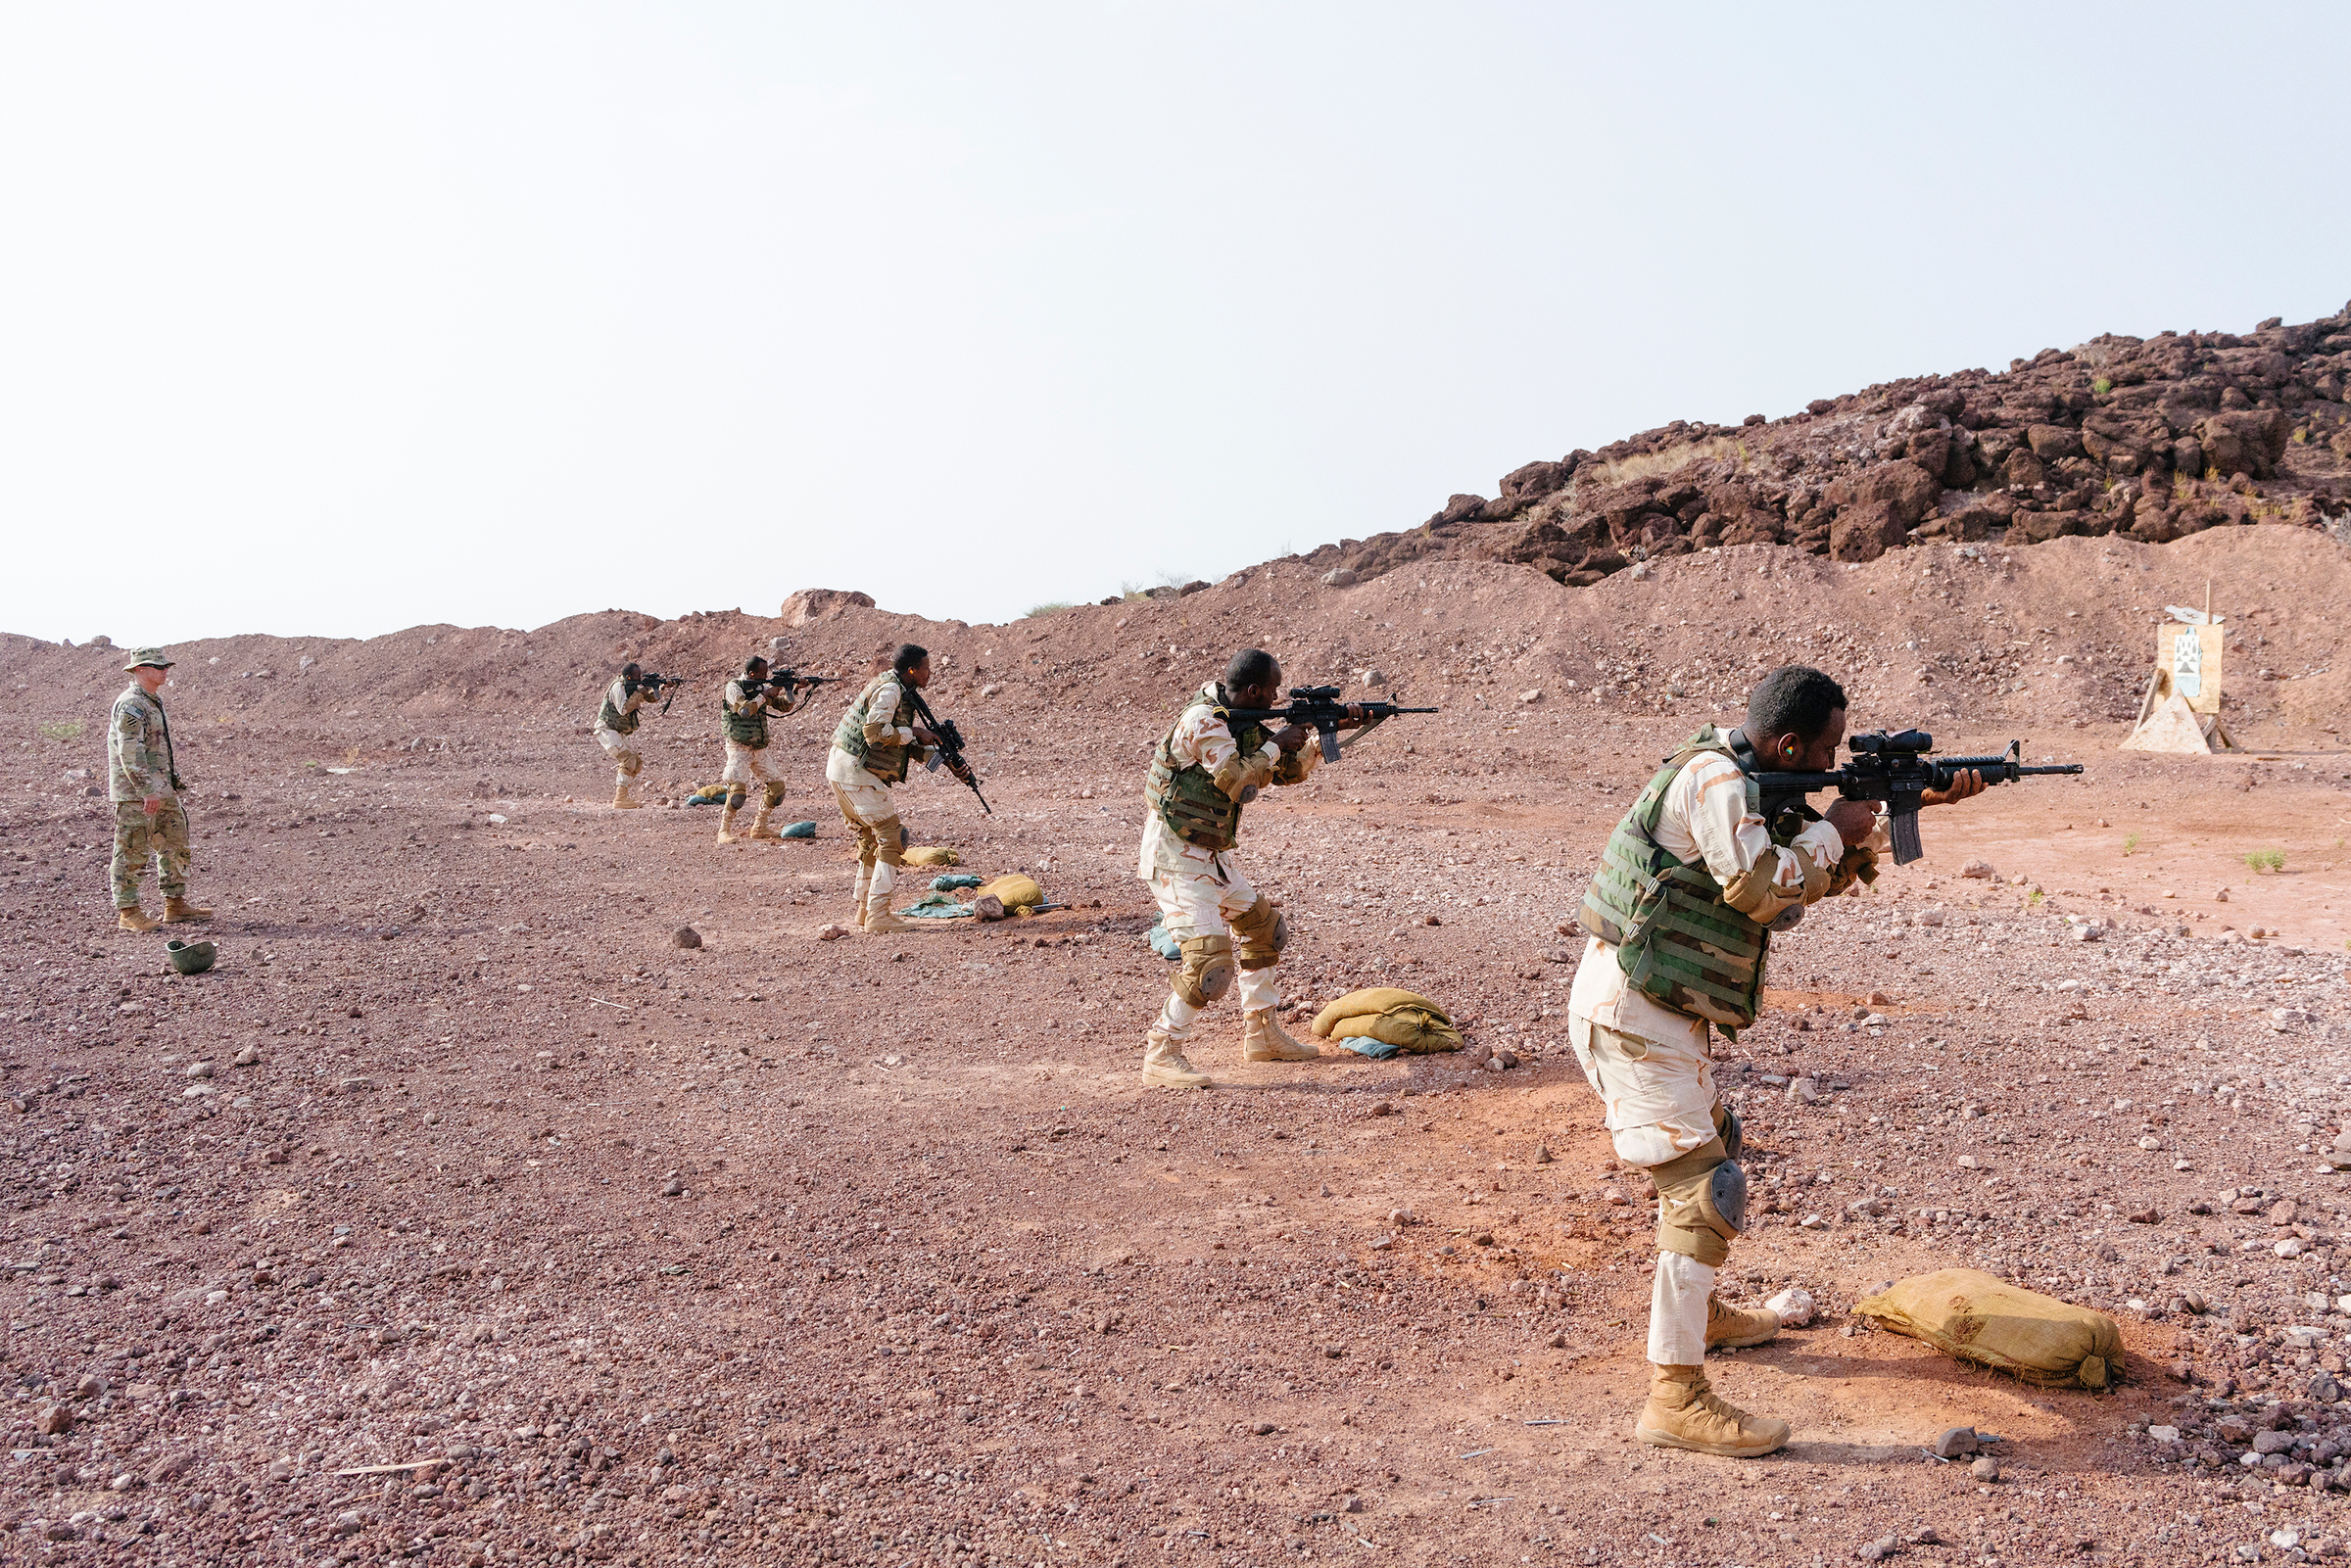 U.S. soldiers oversee marksmanship training of the Djiboutian Bataillon d’Intervention Rapide, an infantry unit equipped with American weaponry.